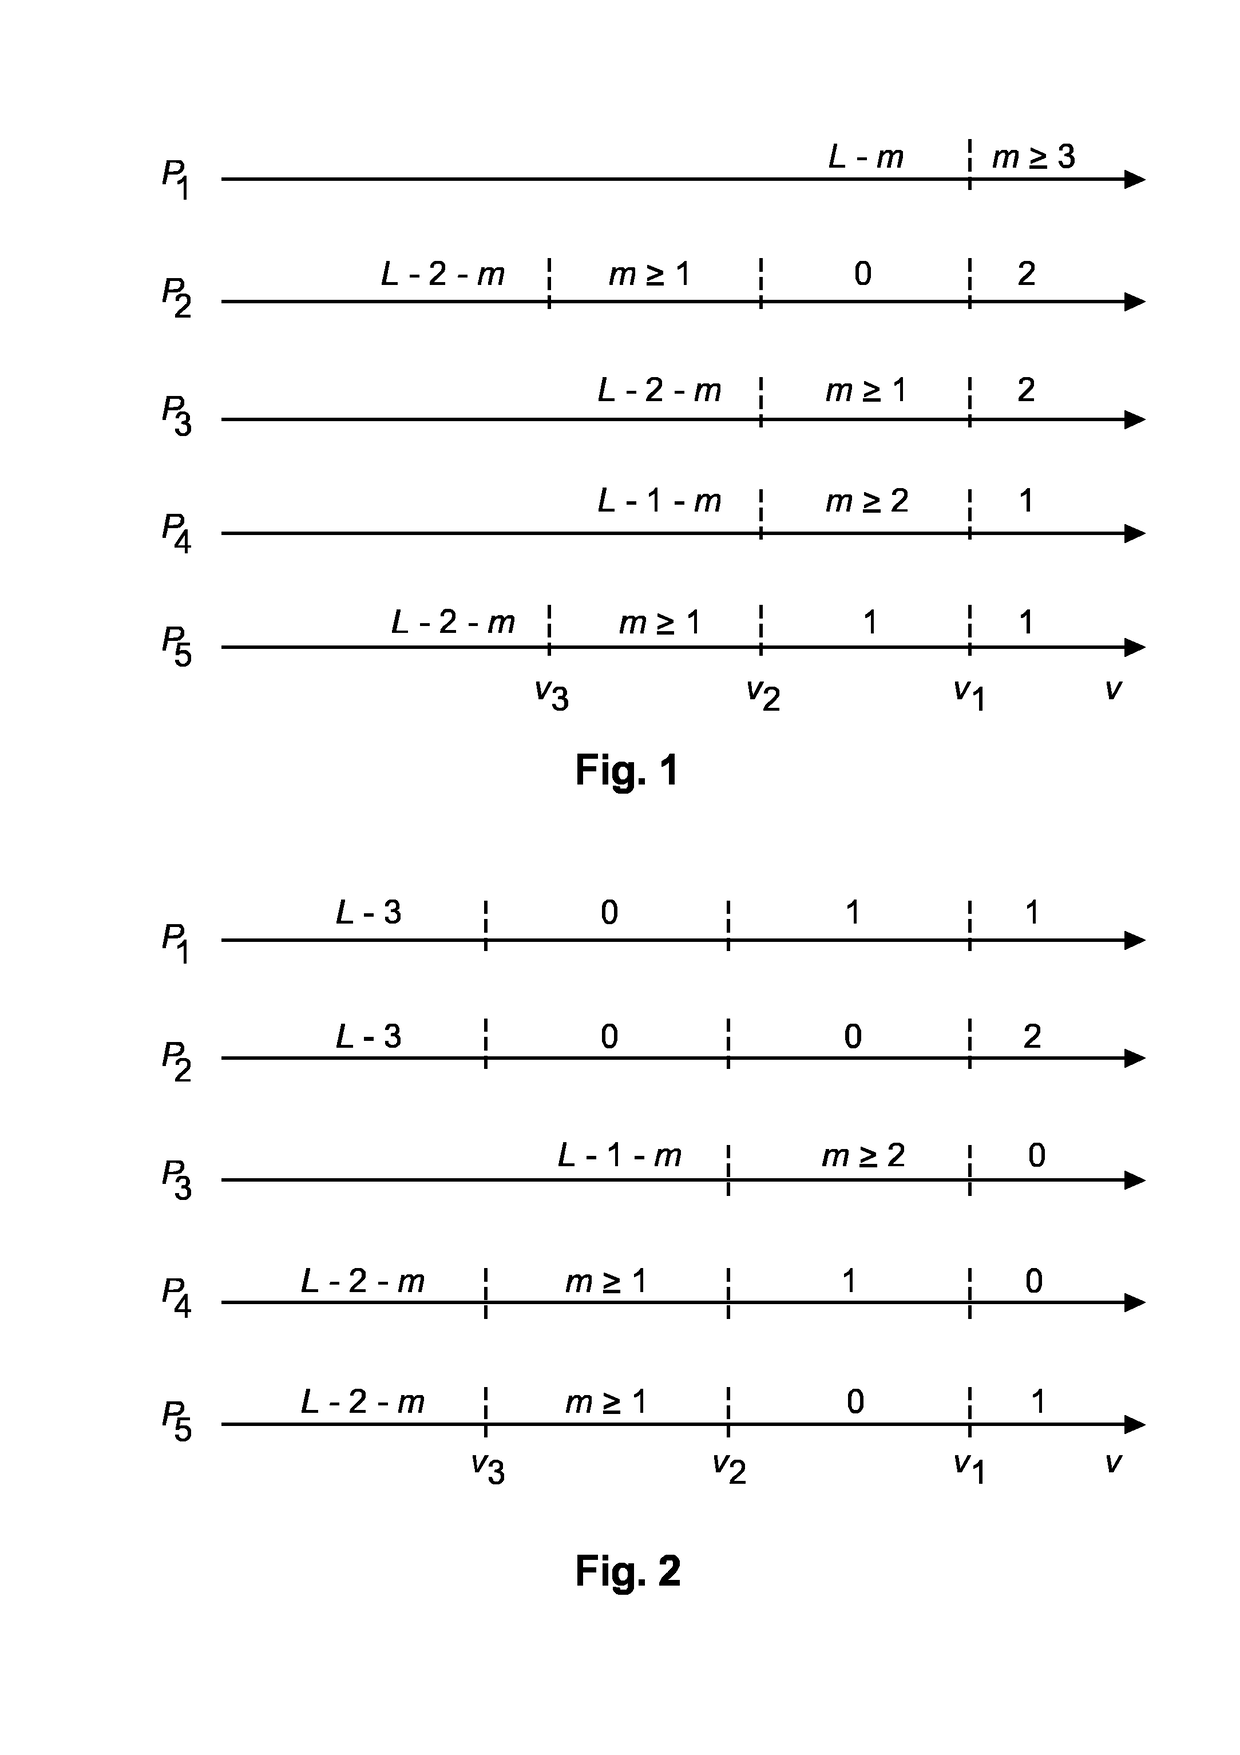 Method and apparatus for determining watermark symbols in a received audio signal that can contain echoes, reverberation and/or noise